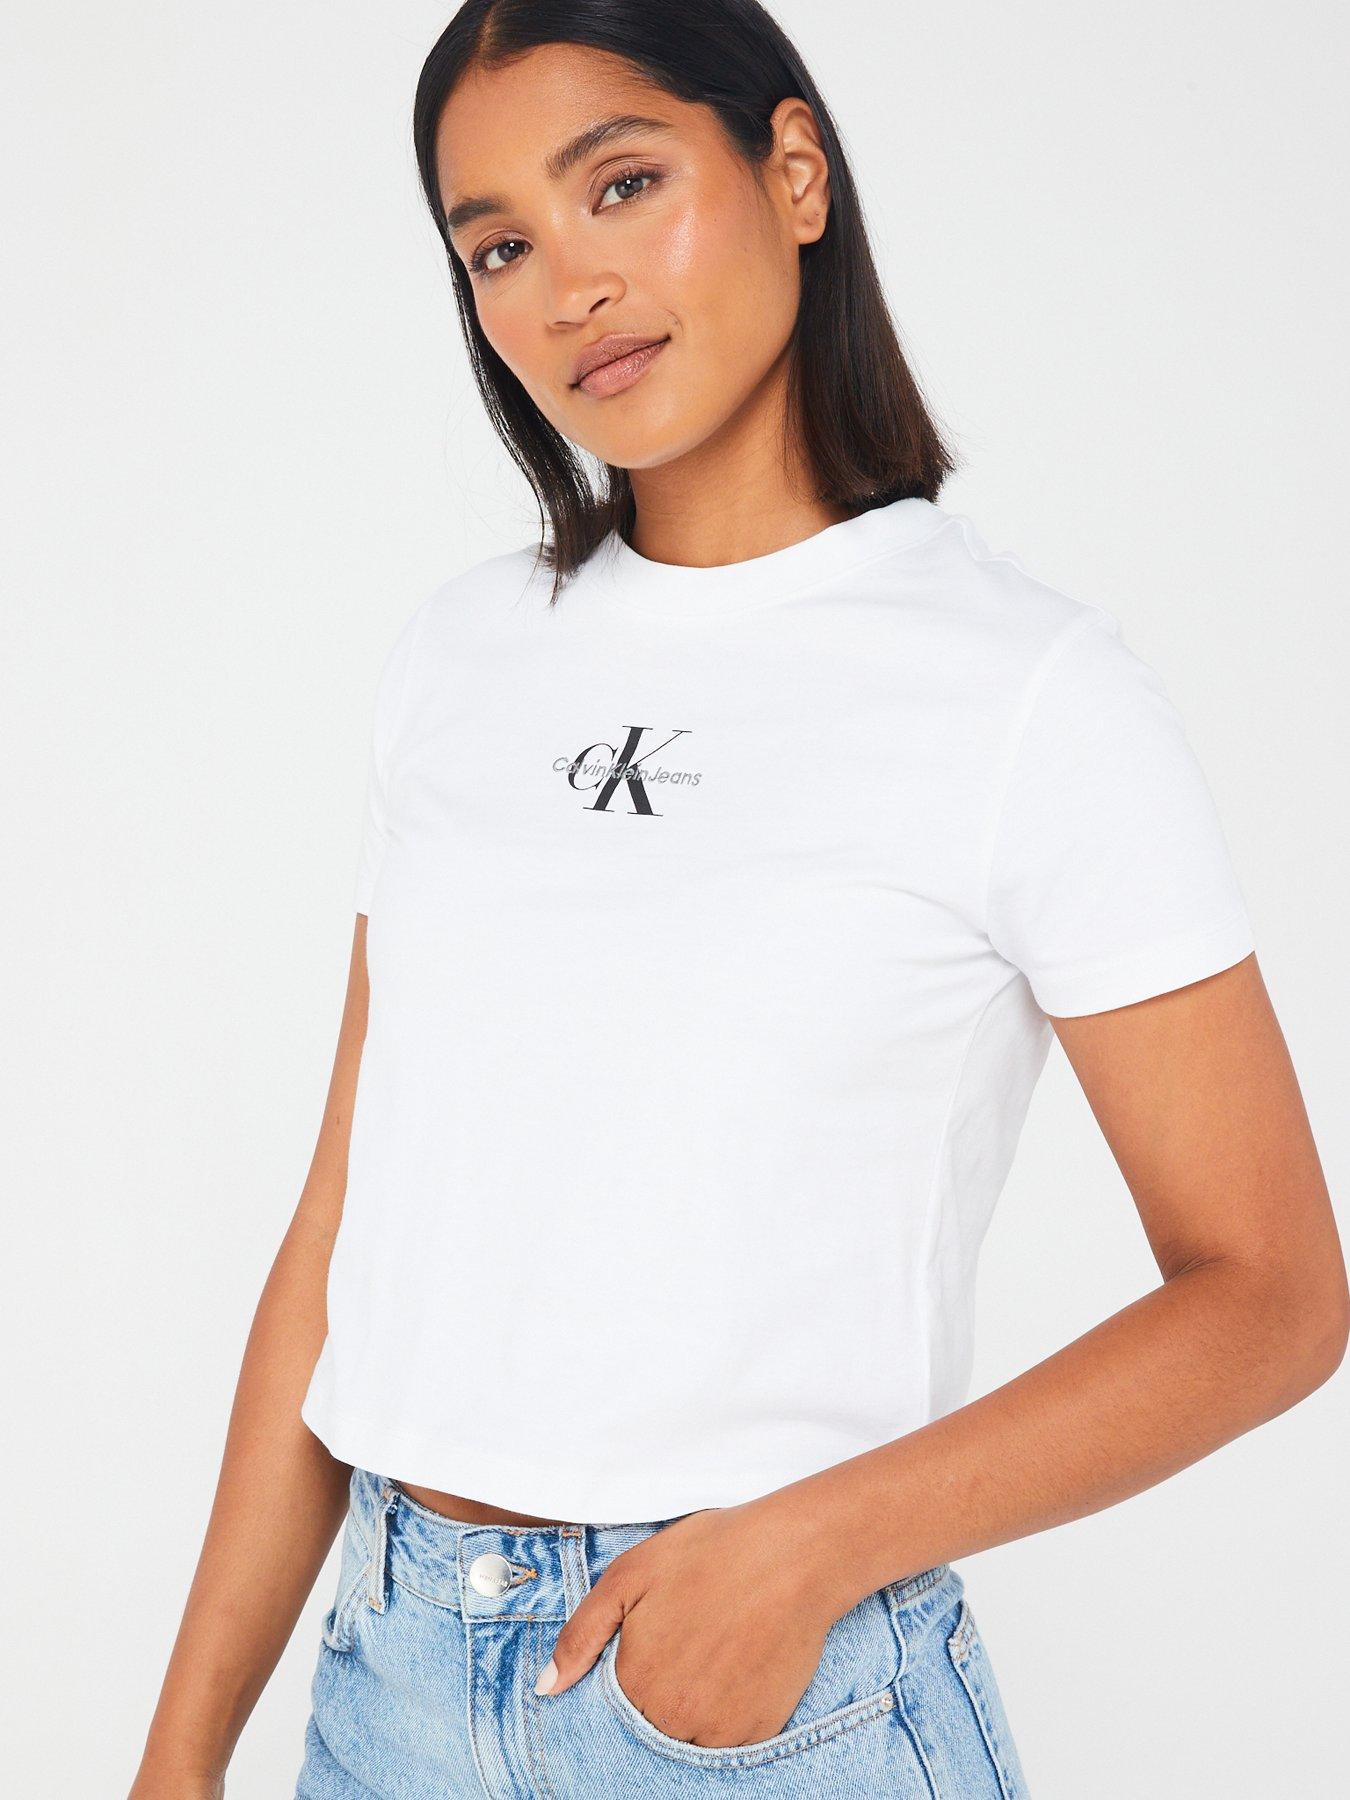 Calvin Klein Jeans Women's Silver Embroidery Loose T-Shirt in